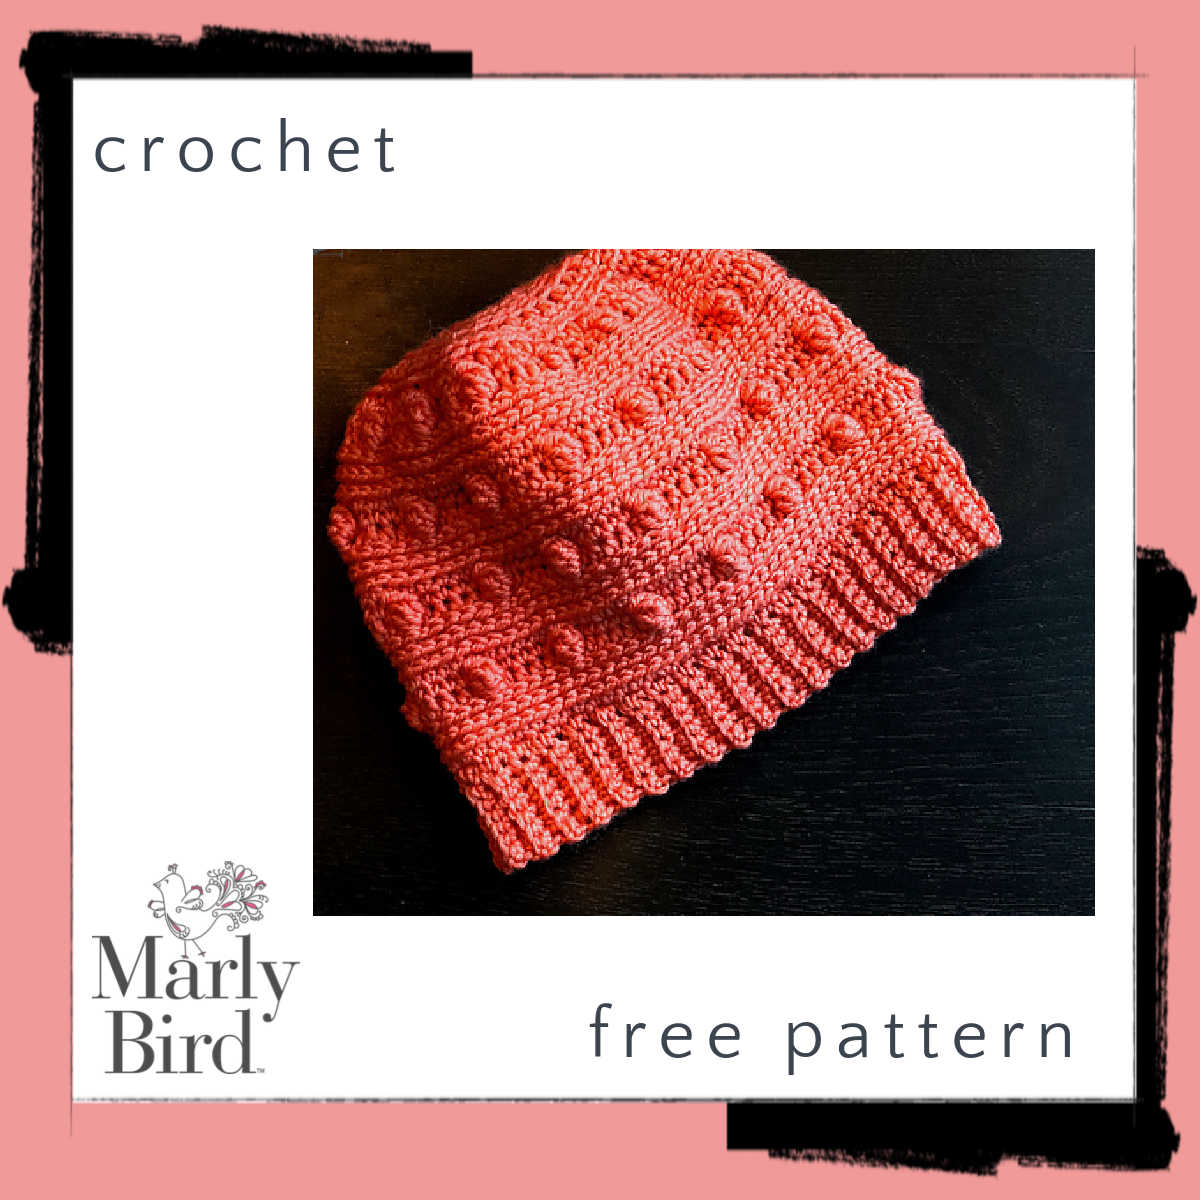 Bobble crochet hat pattern: coral colored crochet hat with alternating stripes of bobbles and knit-look stitches, on dark background.